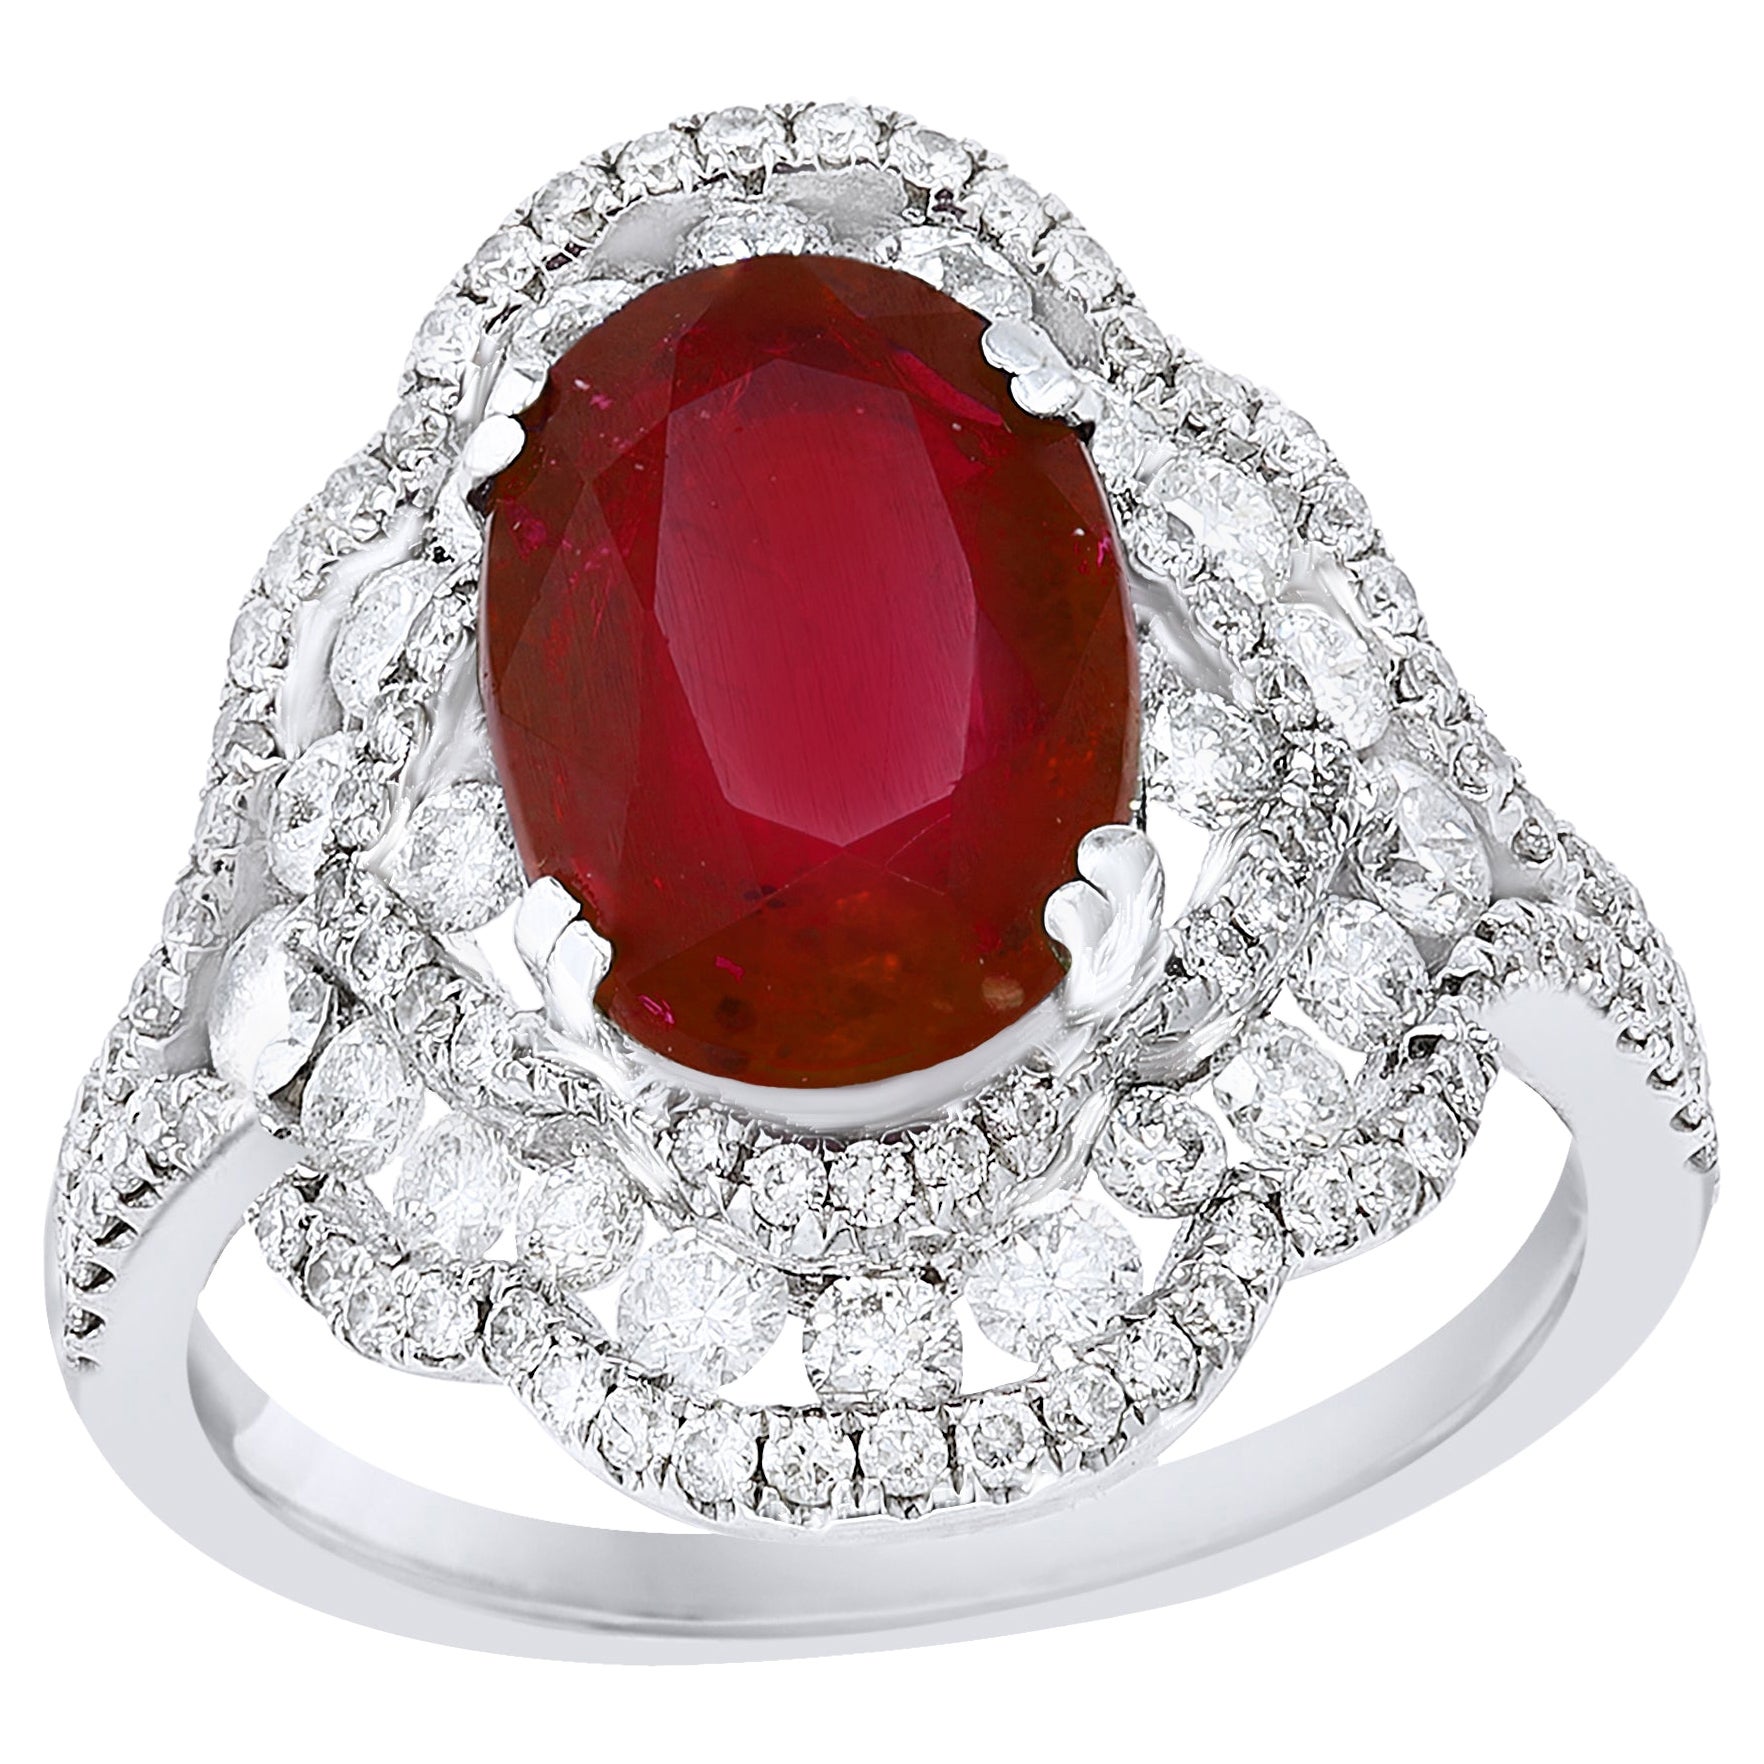 3.06 Carat Oval Ruby and Diamond Cocktail Ring in 18K White Gold For Sale